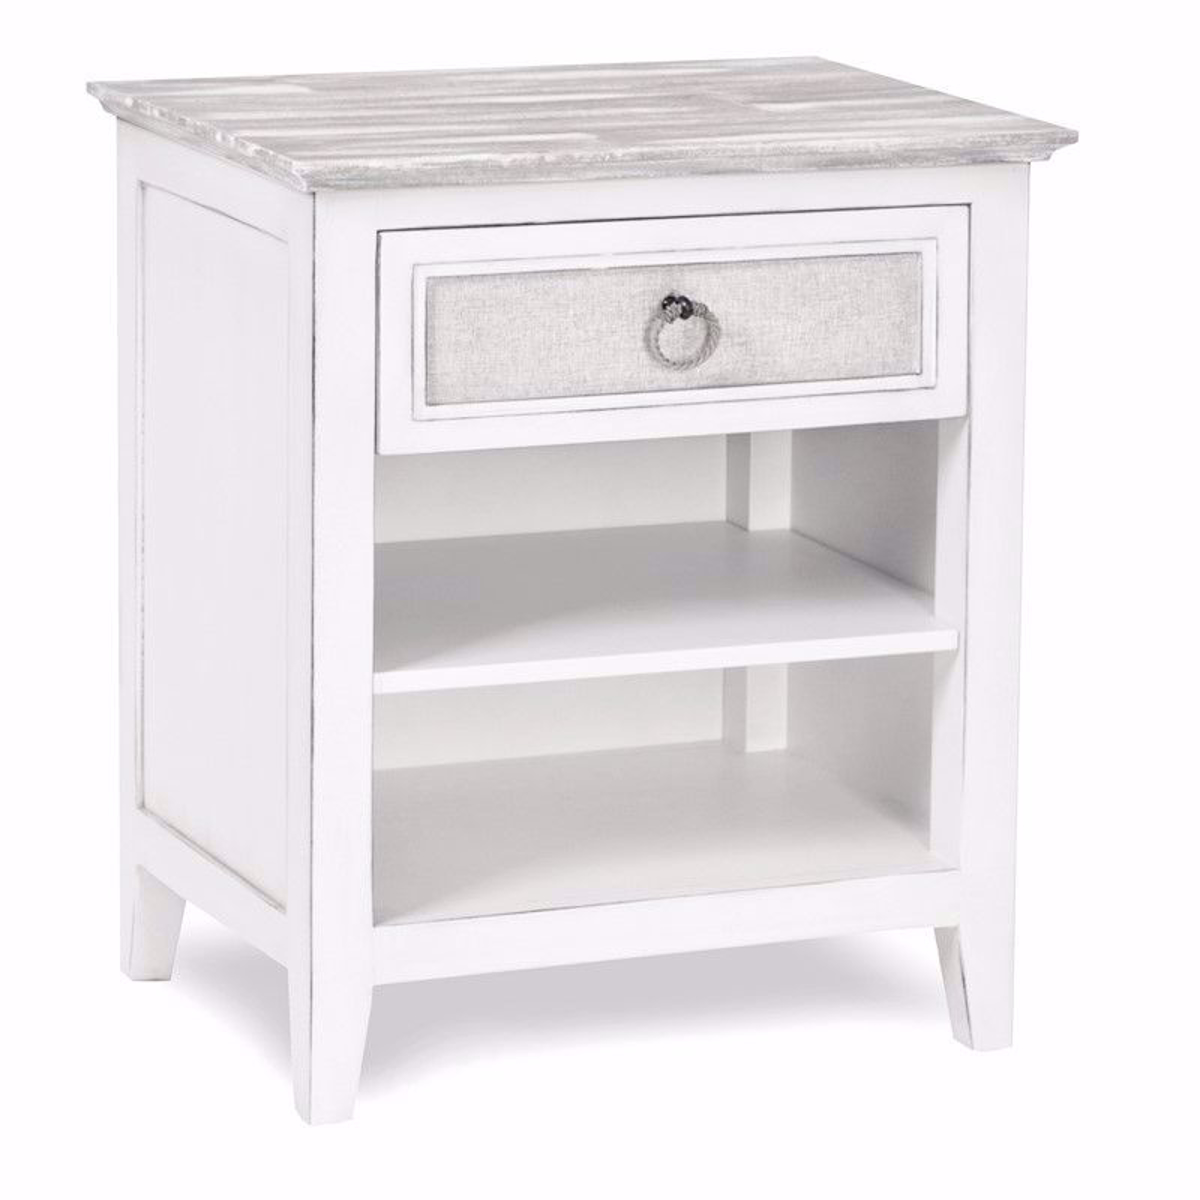 Picture of Captiva Island 1 Drawer Nightstand